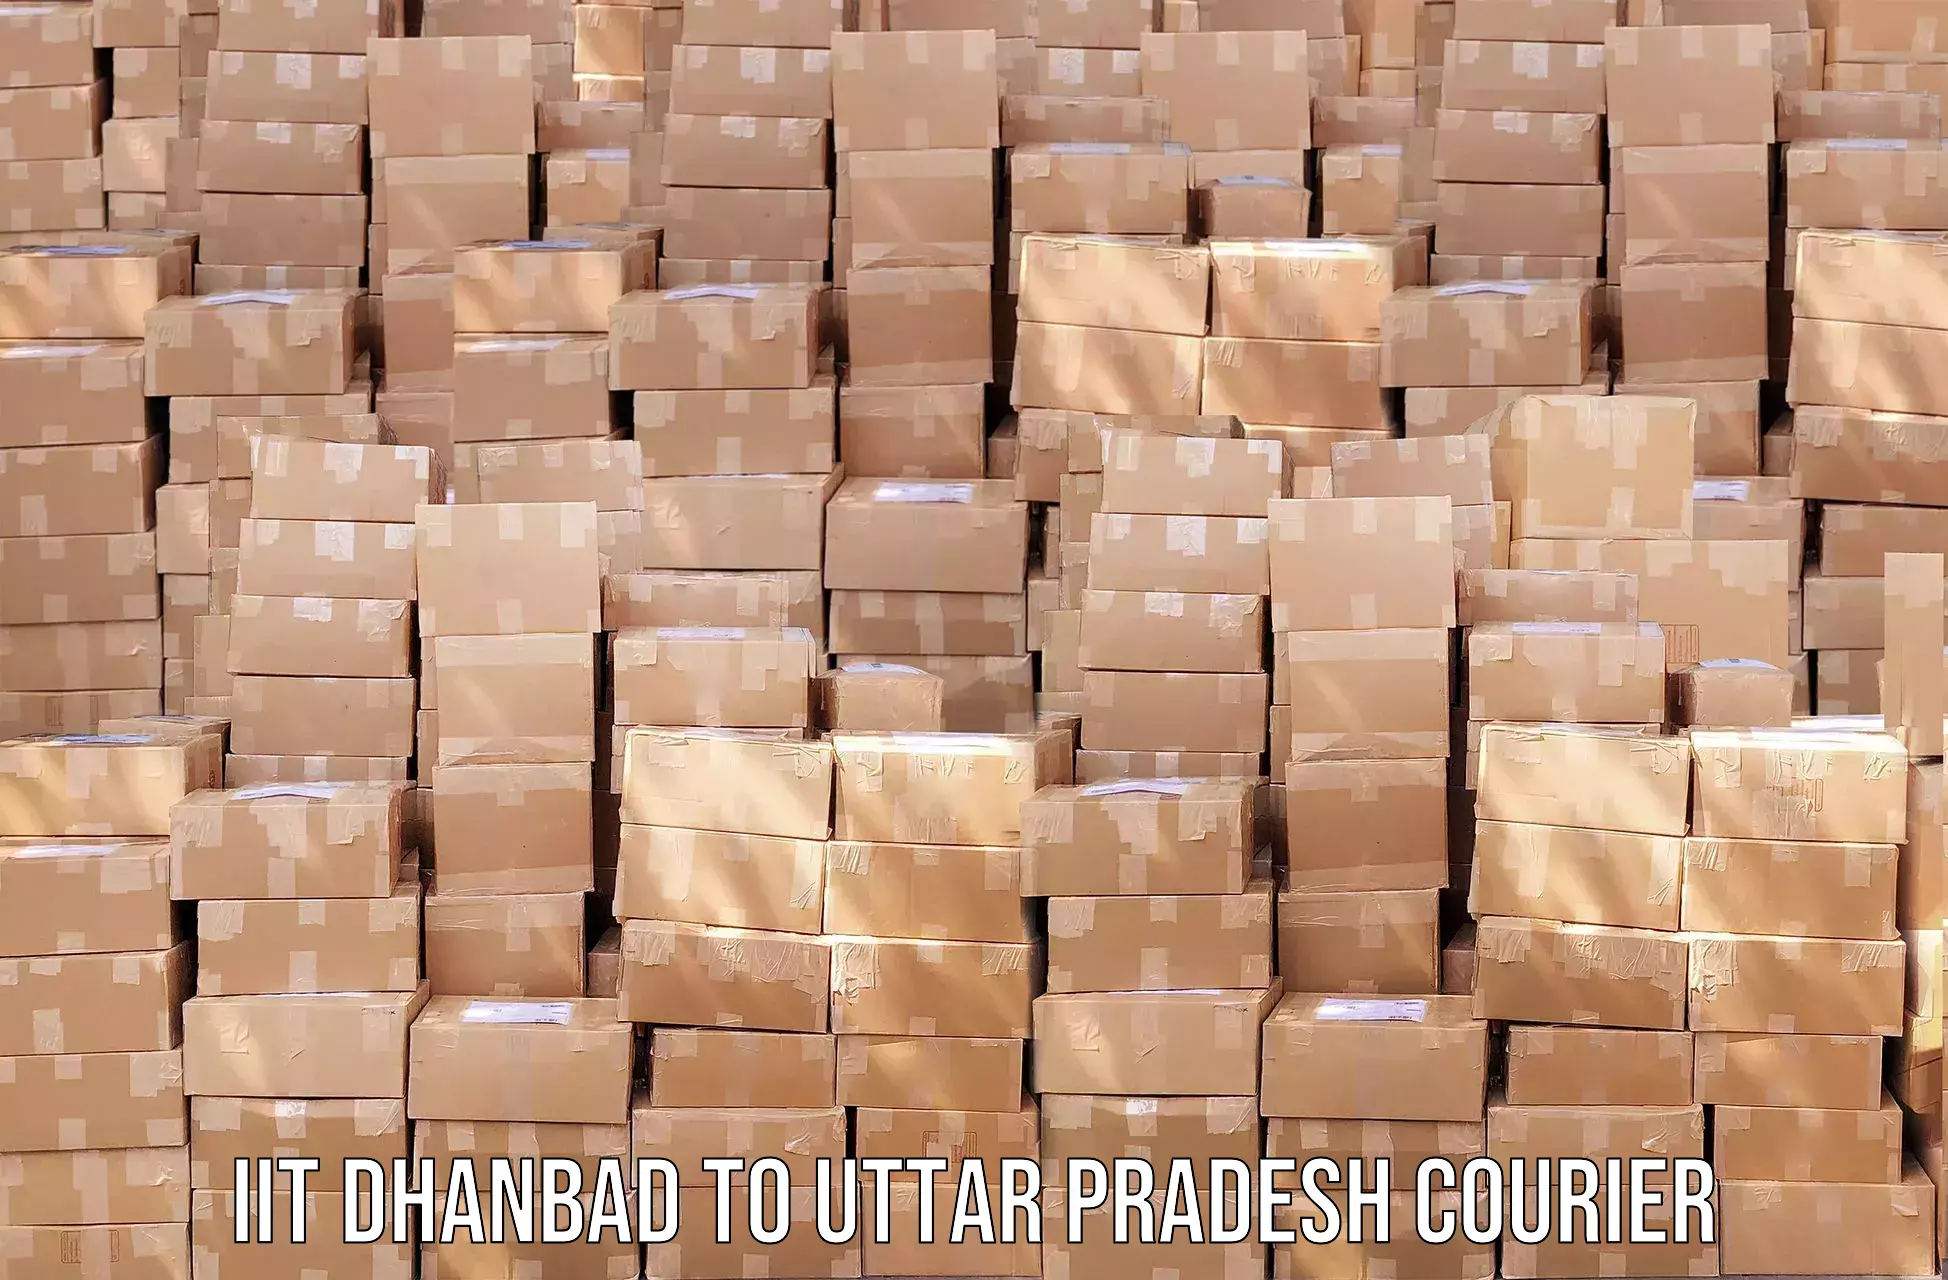 State-of-the-art courier technology IIT Dhanbad to Dhanghata